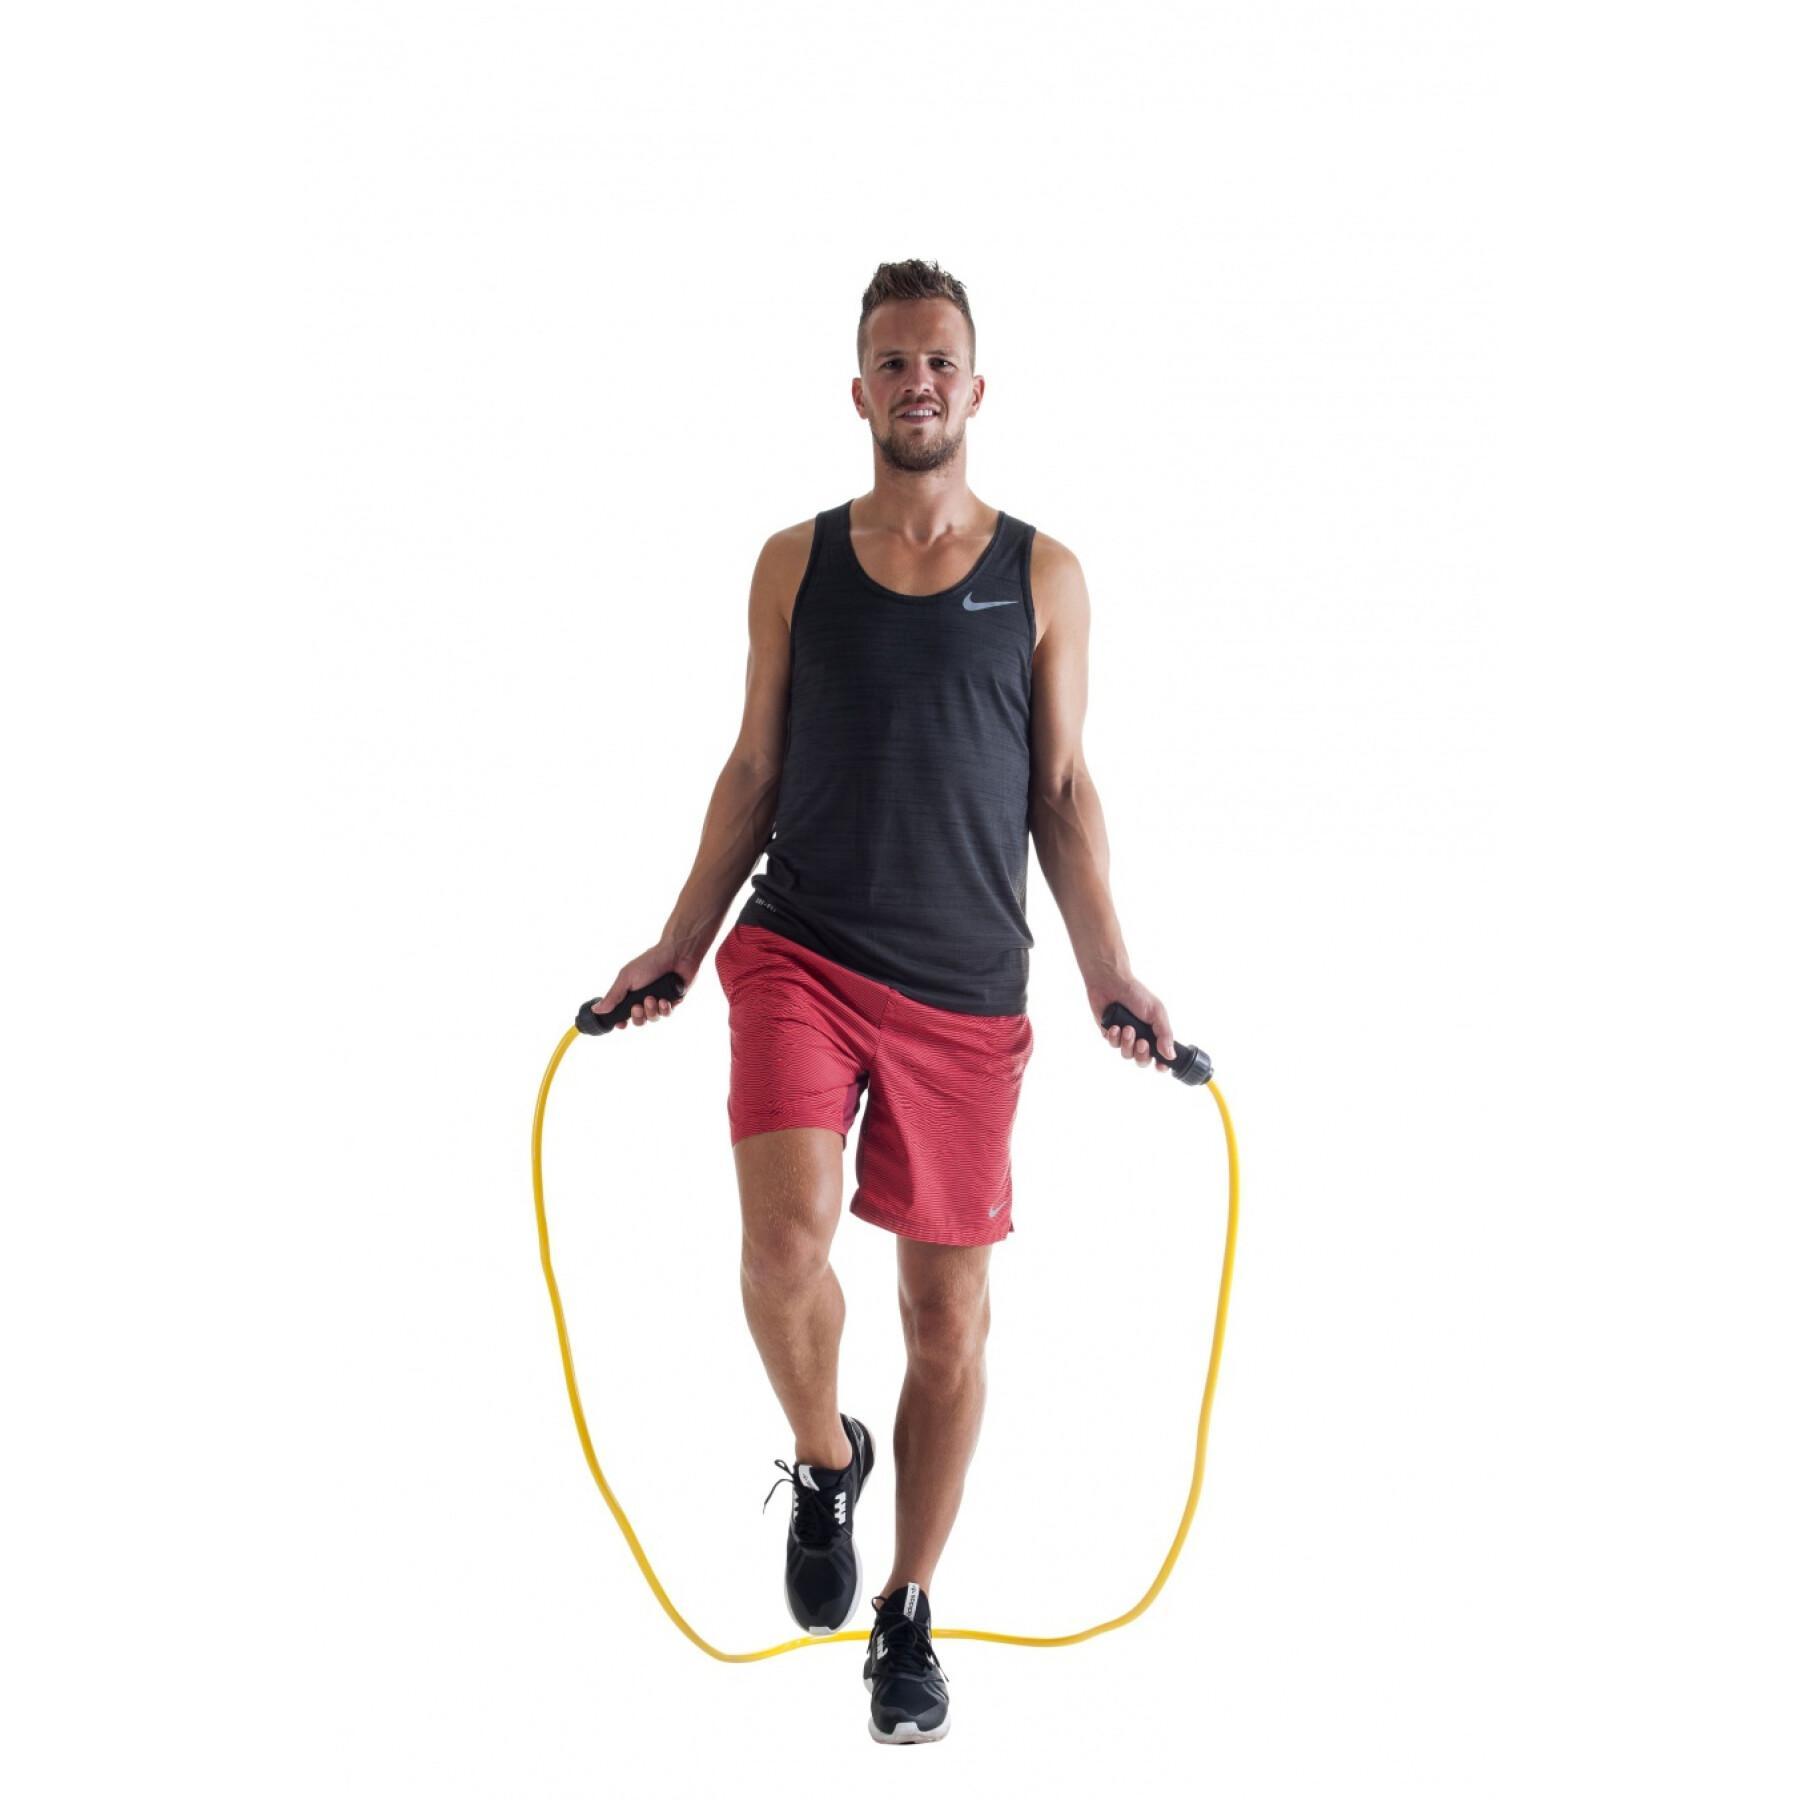 Skipping Rope Pure2Improve easy